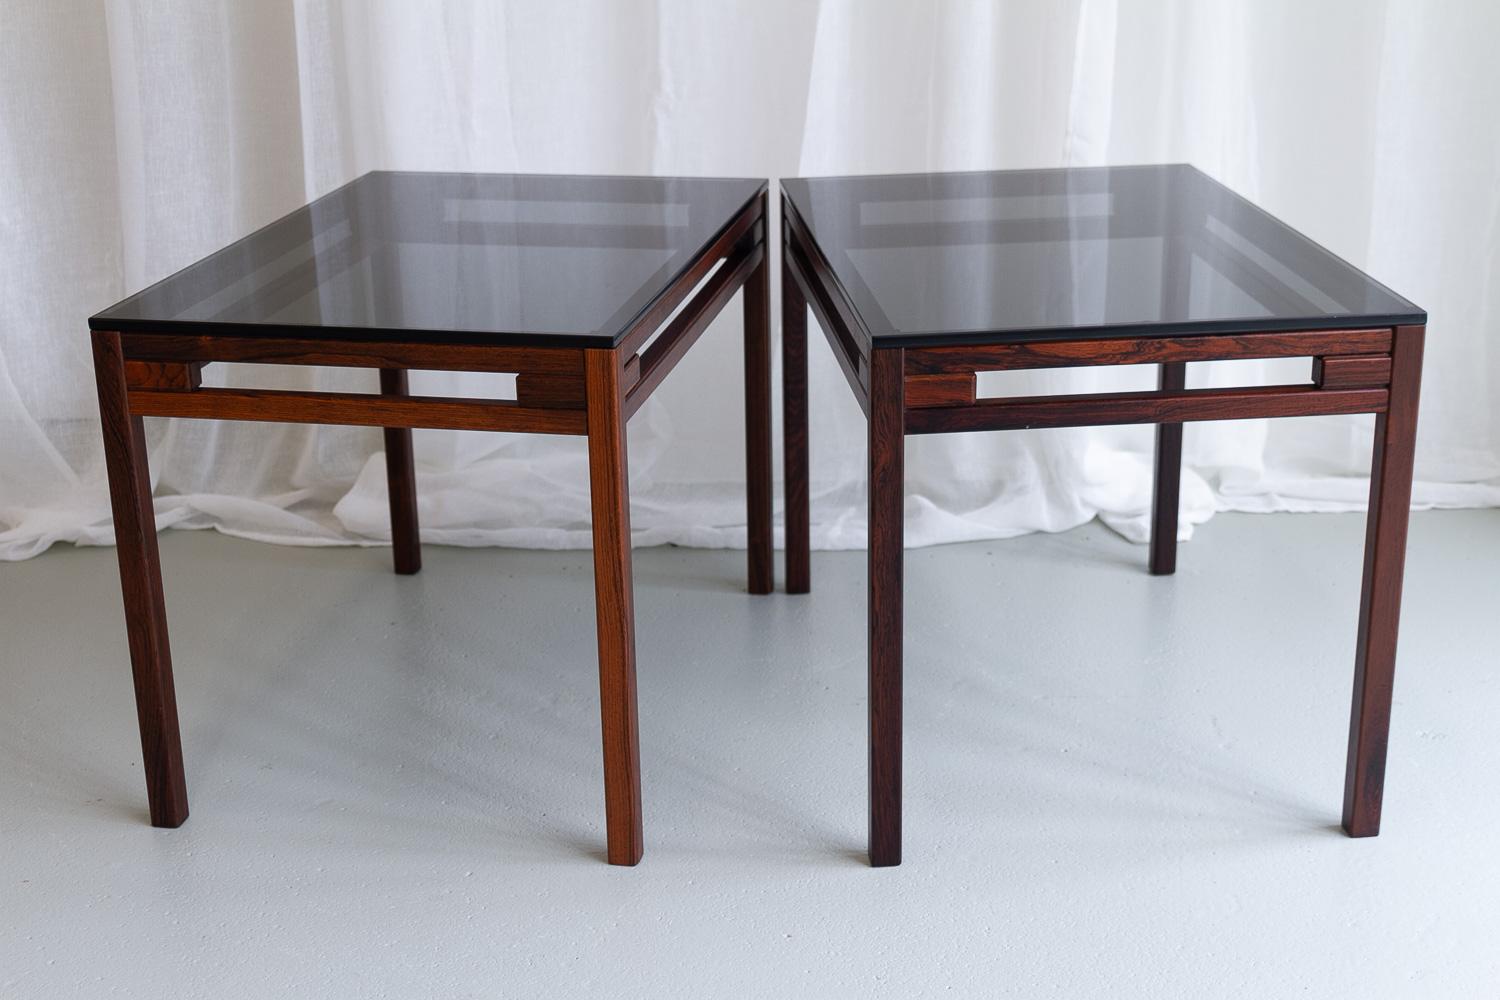 Danish Modern Side Tables in Rosewood and Glass, 1960s. Set of 2. For Sale 7